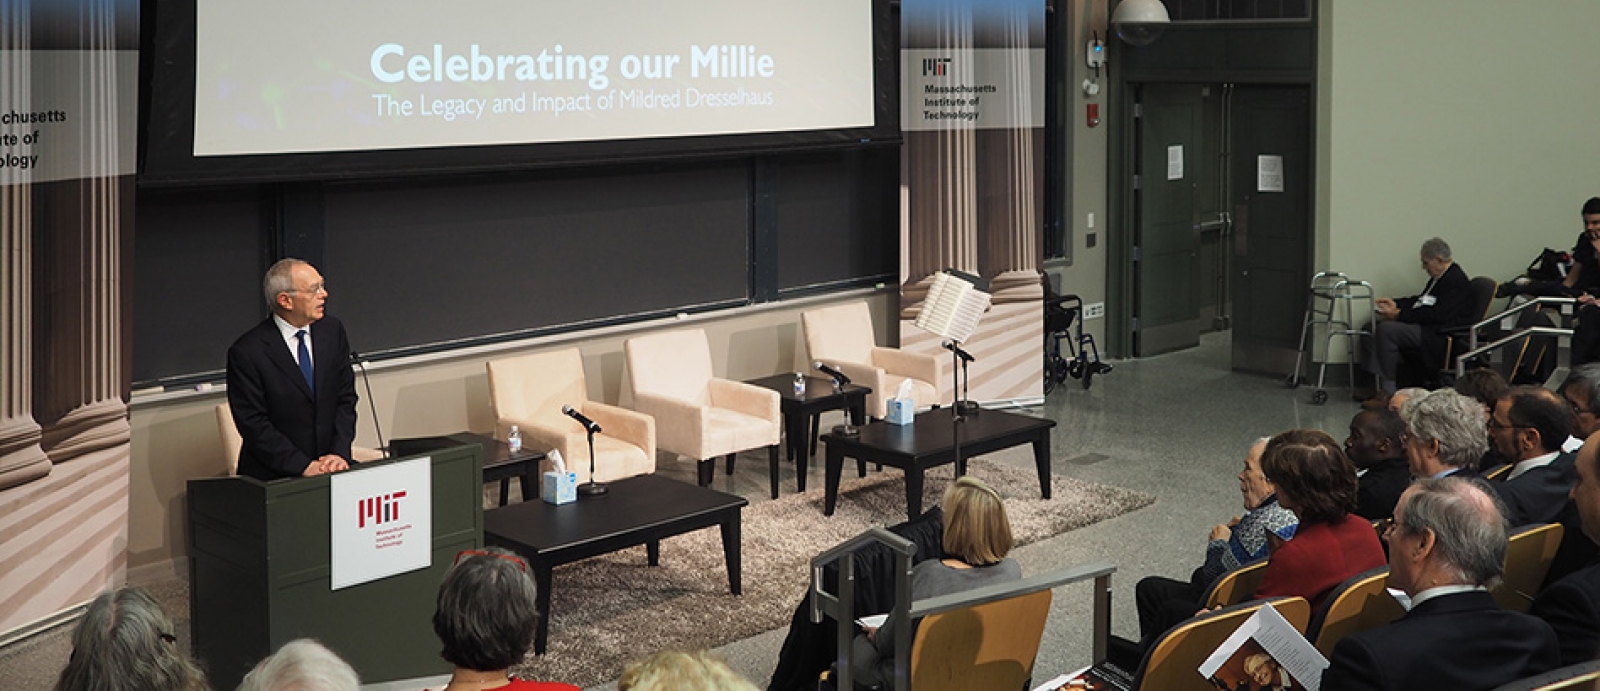 MIT President L. Rafael Reif welcomes family, colleagues, friends, former students, and other associates of the late MIT Institute Professor Mildred “Millie” Dresselhaus to a symposium celebrating her life and career. 